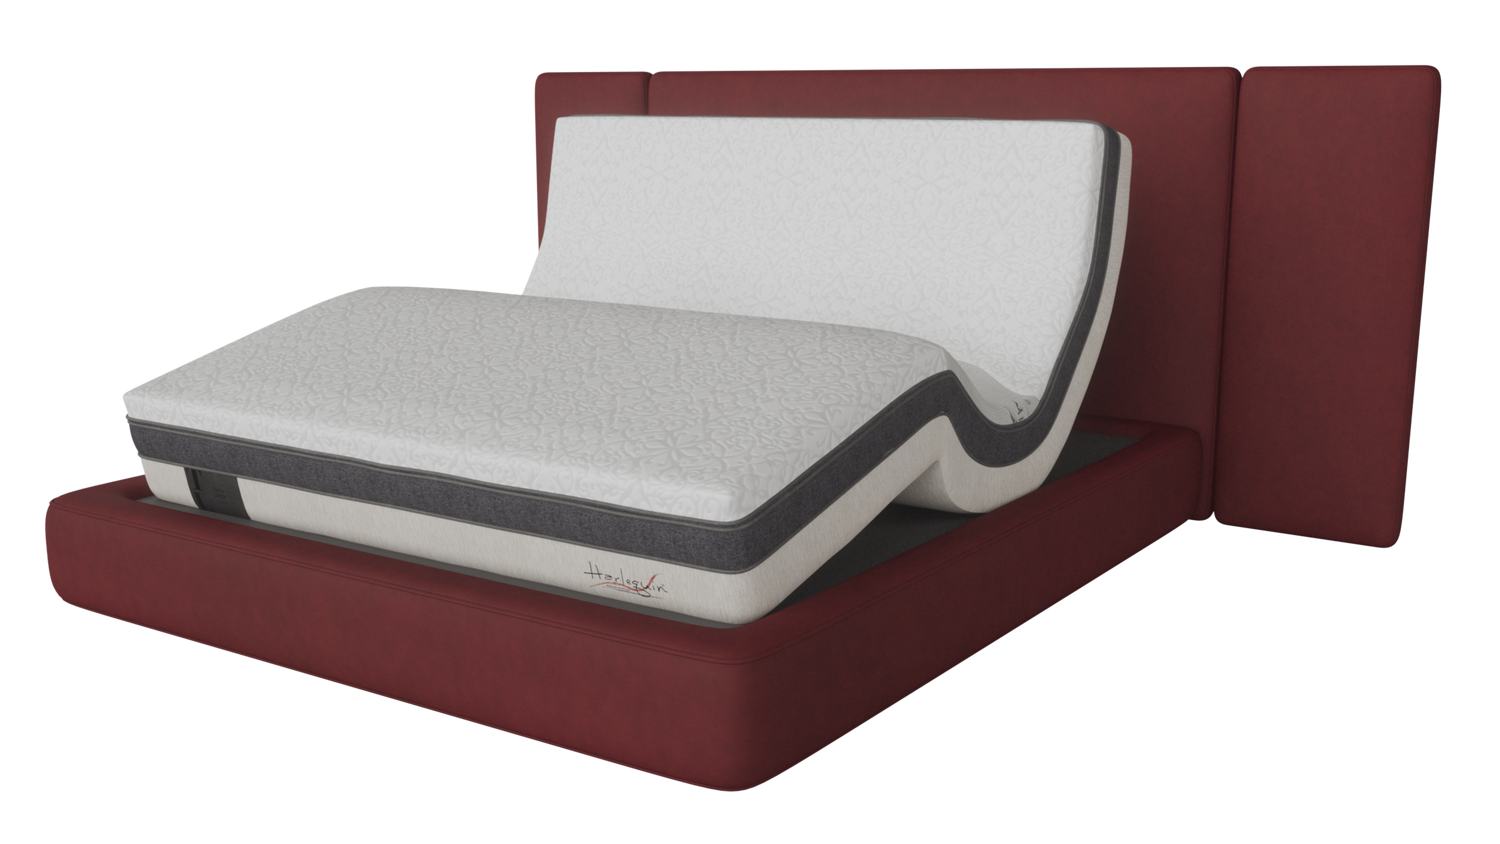 THE ONLY MATTRESS THAT DOES NOT REQUIRE AN ADJUSTABLE BASE FOR OPTIMAL SUPPORT